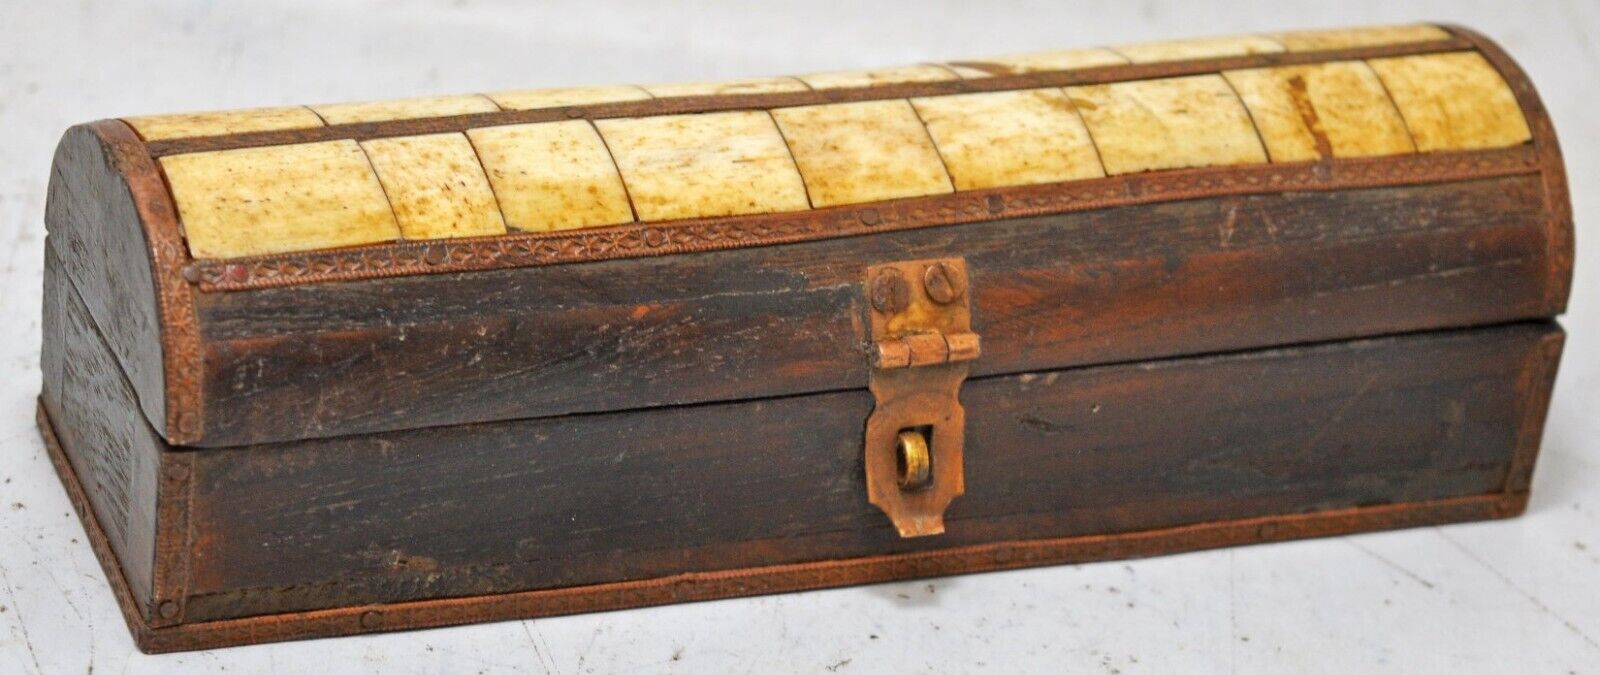 Vintage Wooden Small Pencil Stationary Box Original Old Hand Crafted